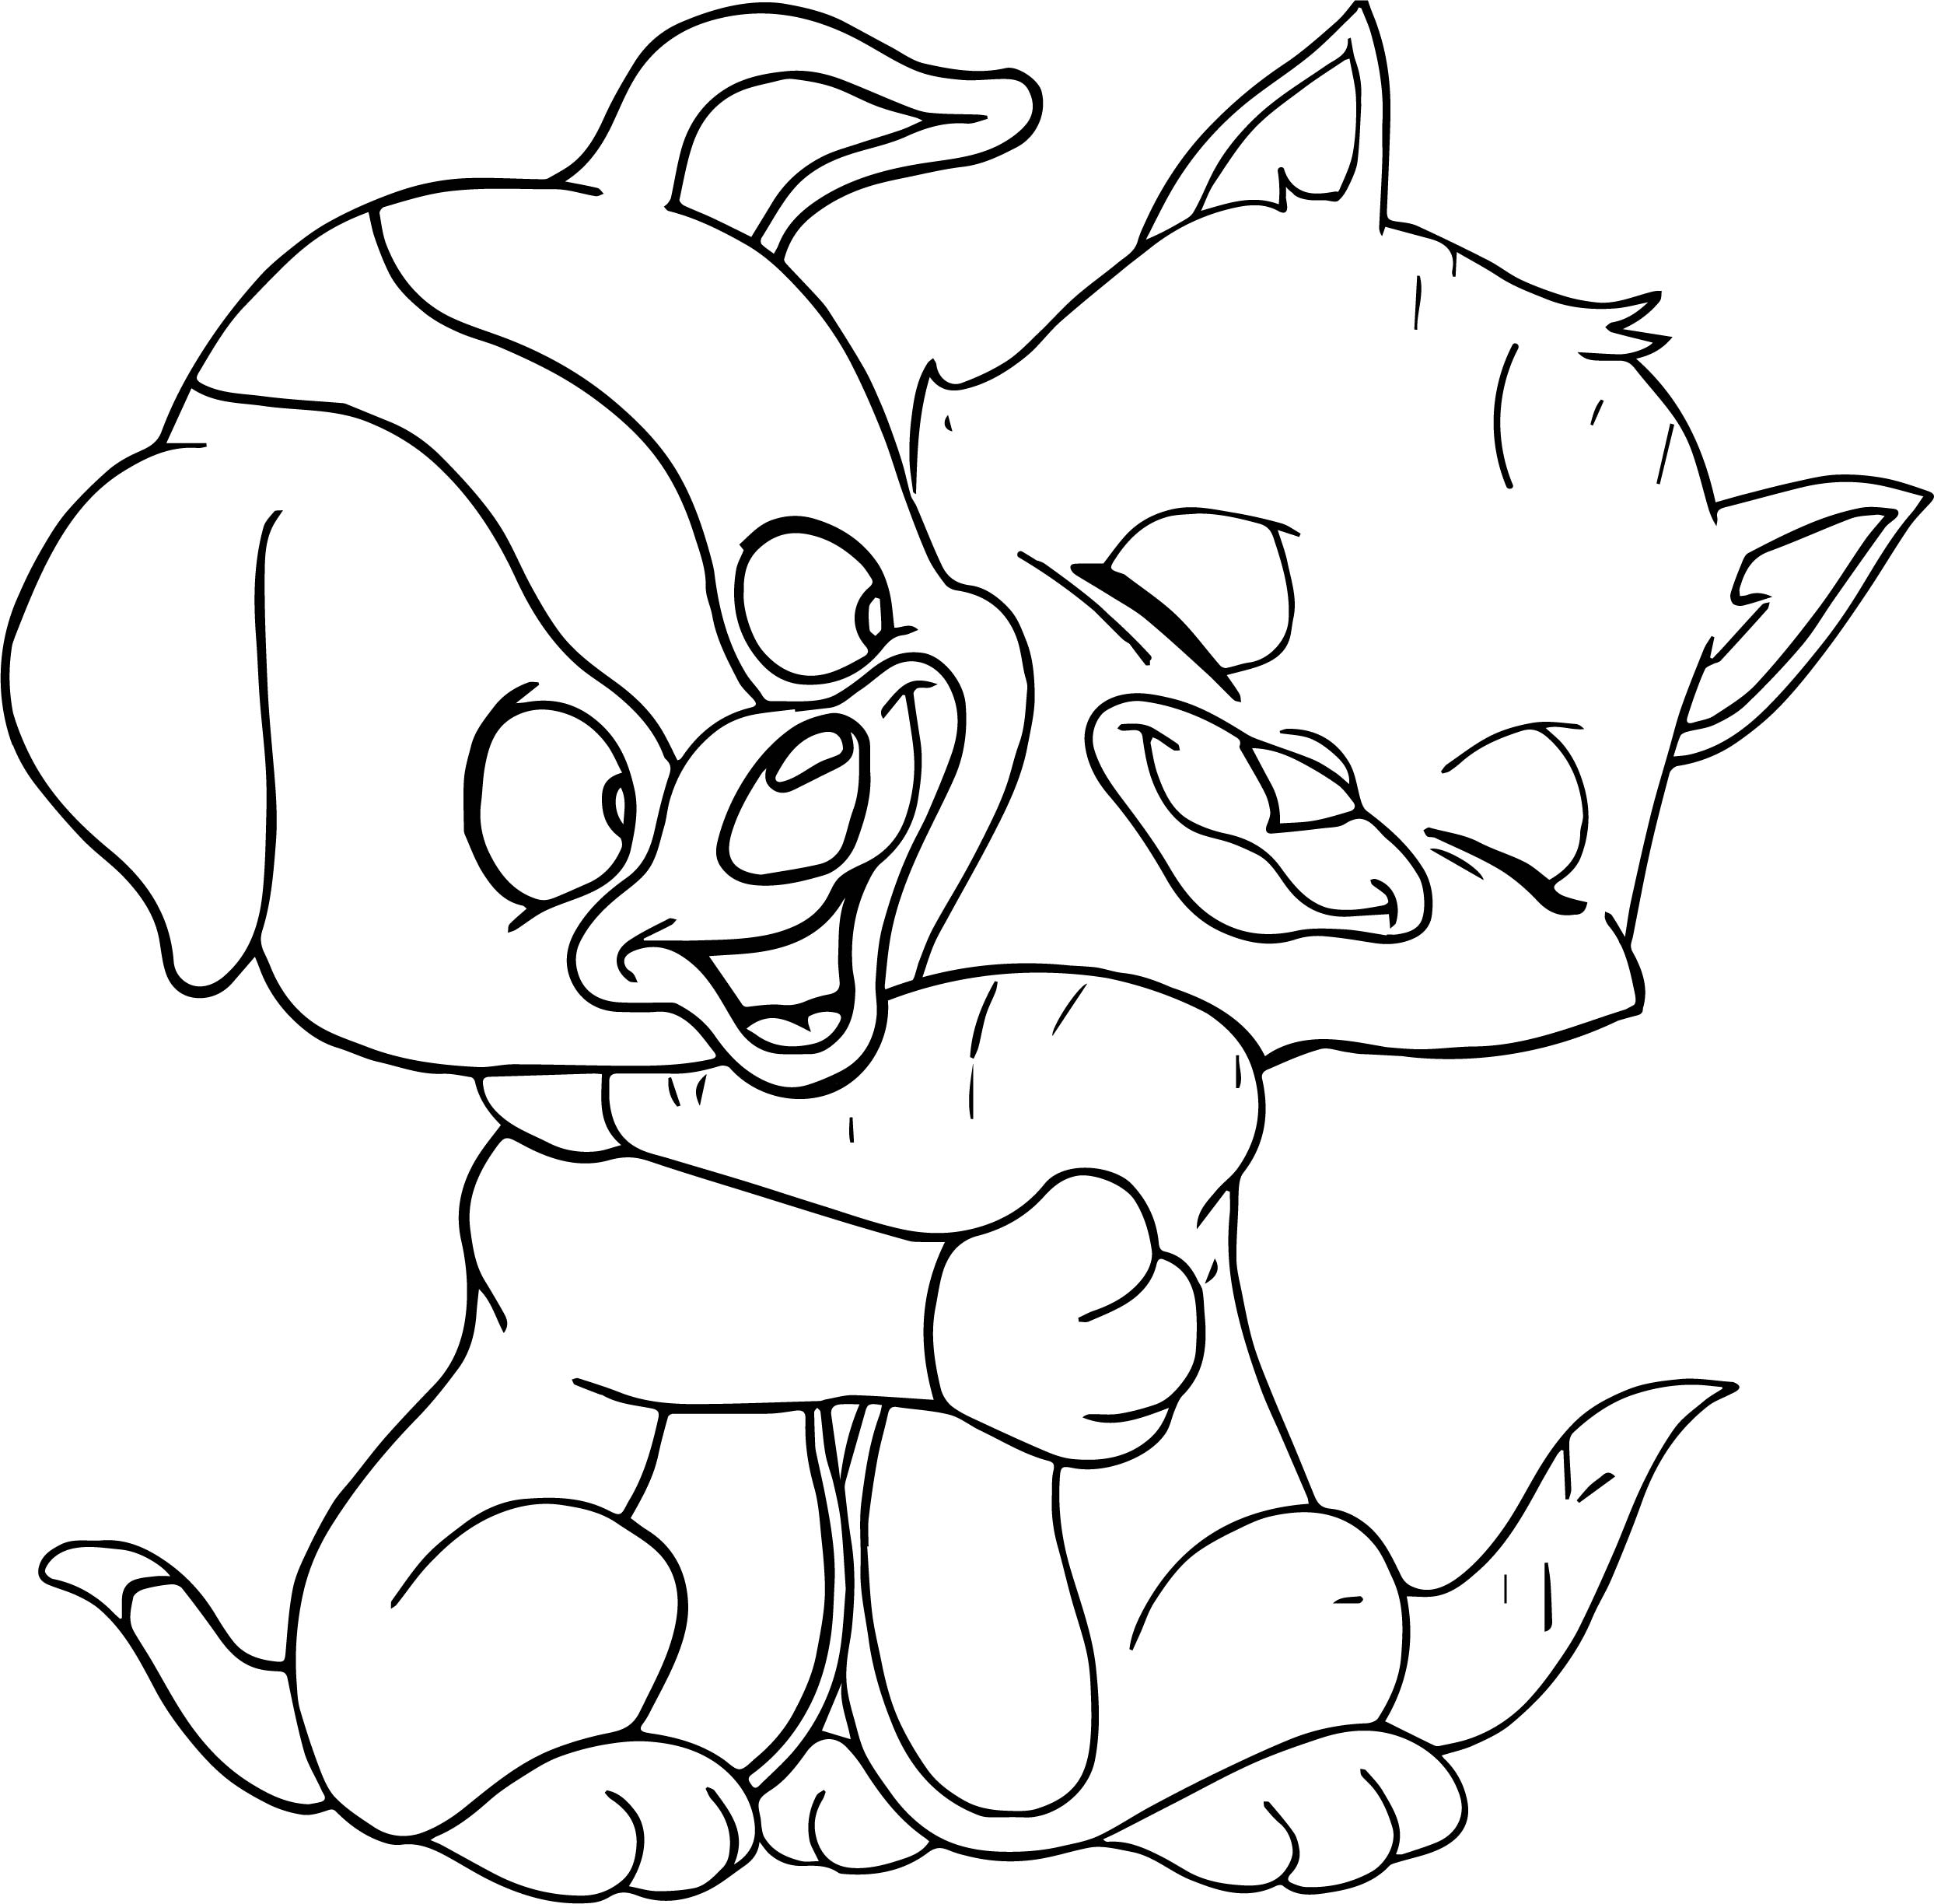 Catdog Coloring Pages at GetColorings.com | Free printable ...